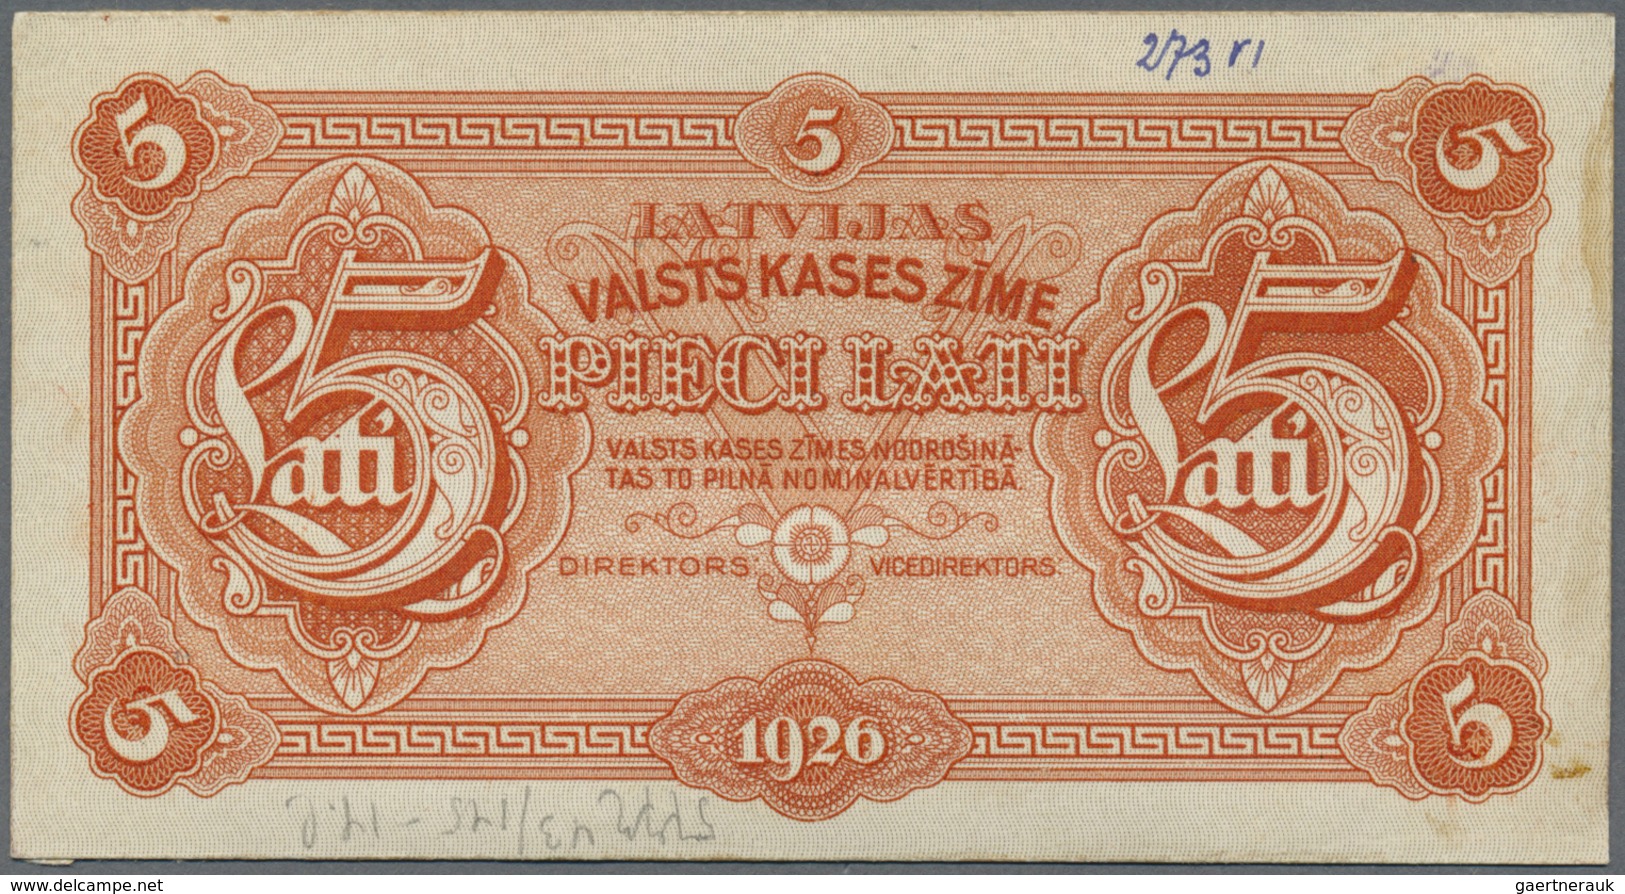 Latvia / Lettland: Very Rare 5 Lati 1926 Front Proof Uniface Print P. 23p, Without Serial #, W/o Sig - Latvia